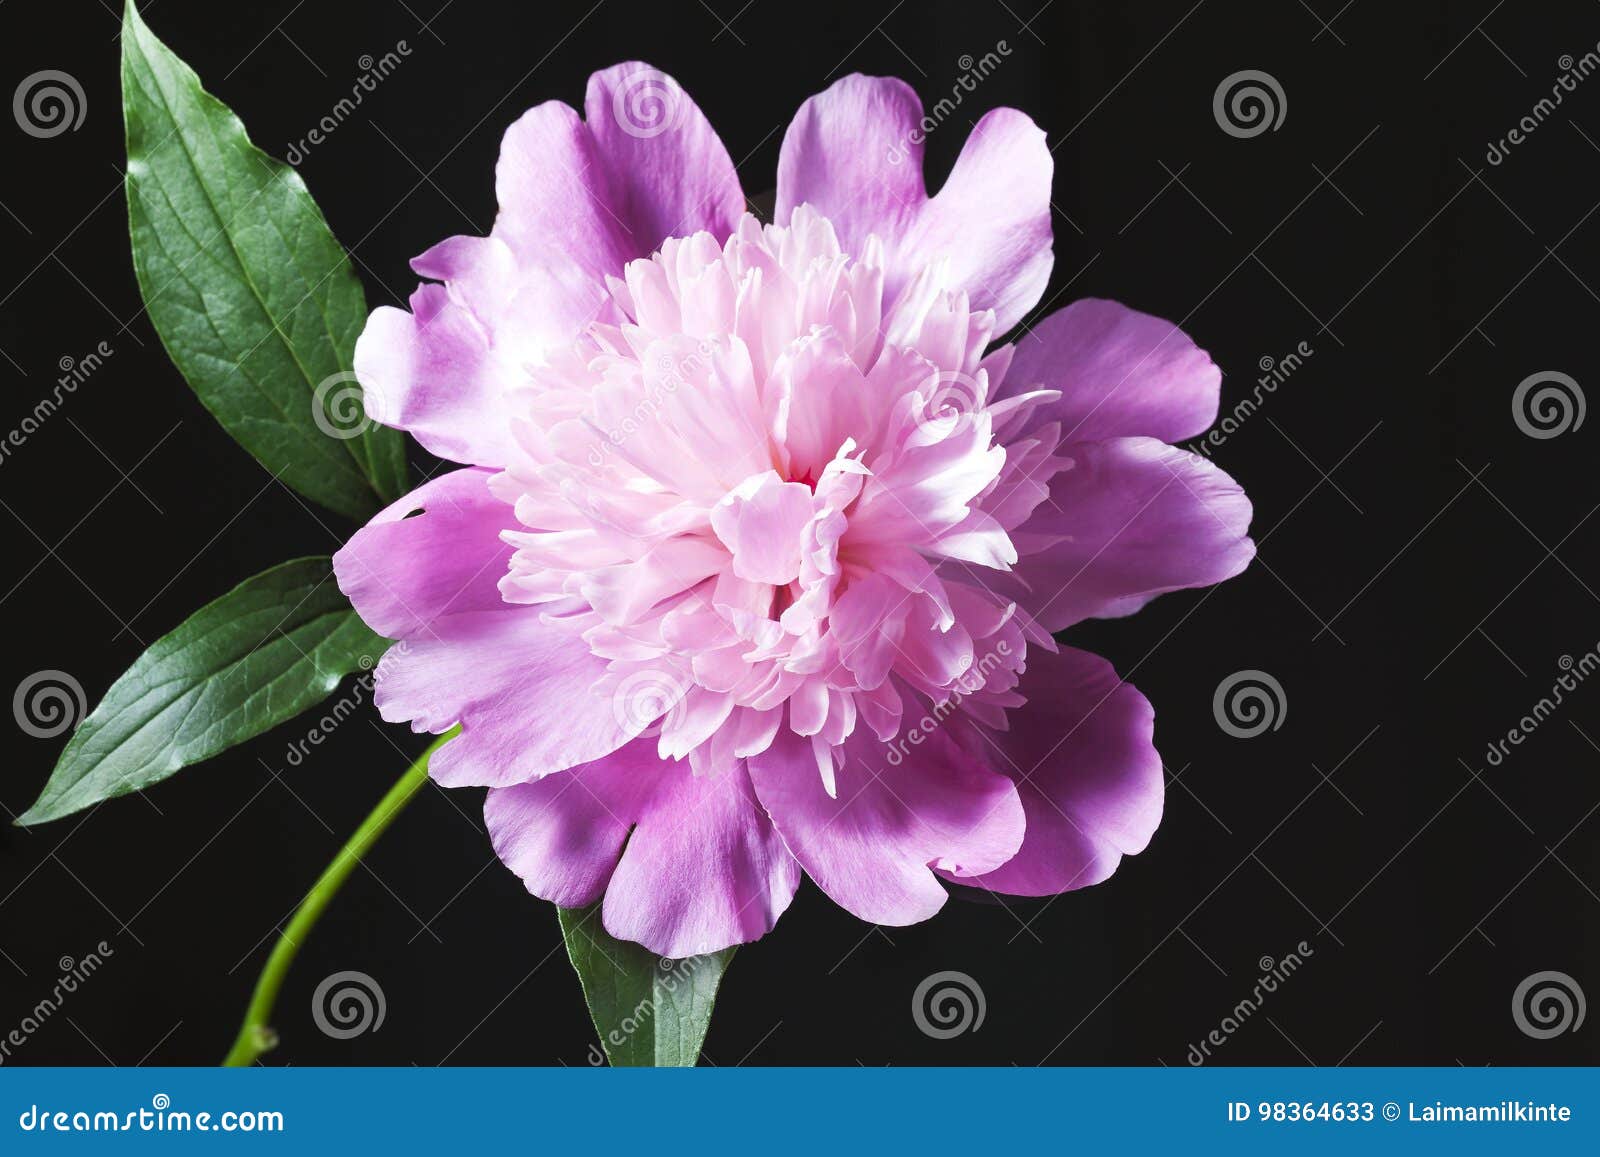 Pink Peony In A Black Background Stock Image Image Of Background Beautiful 98364633